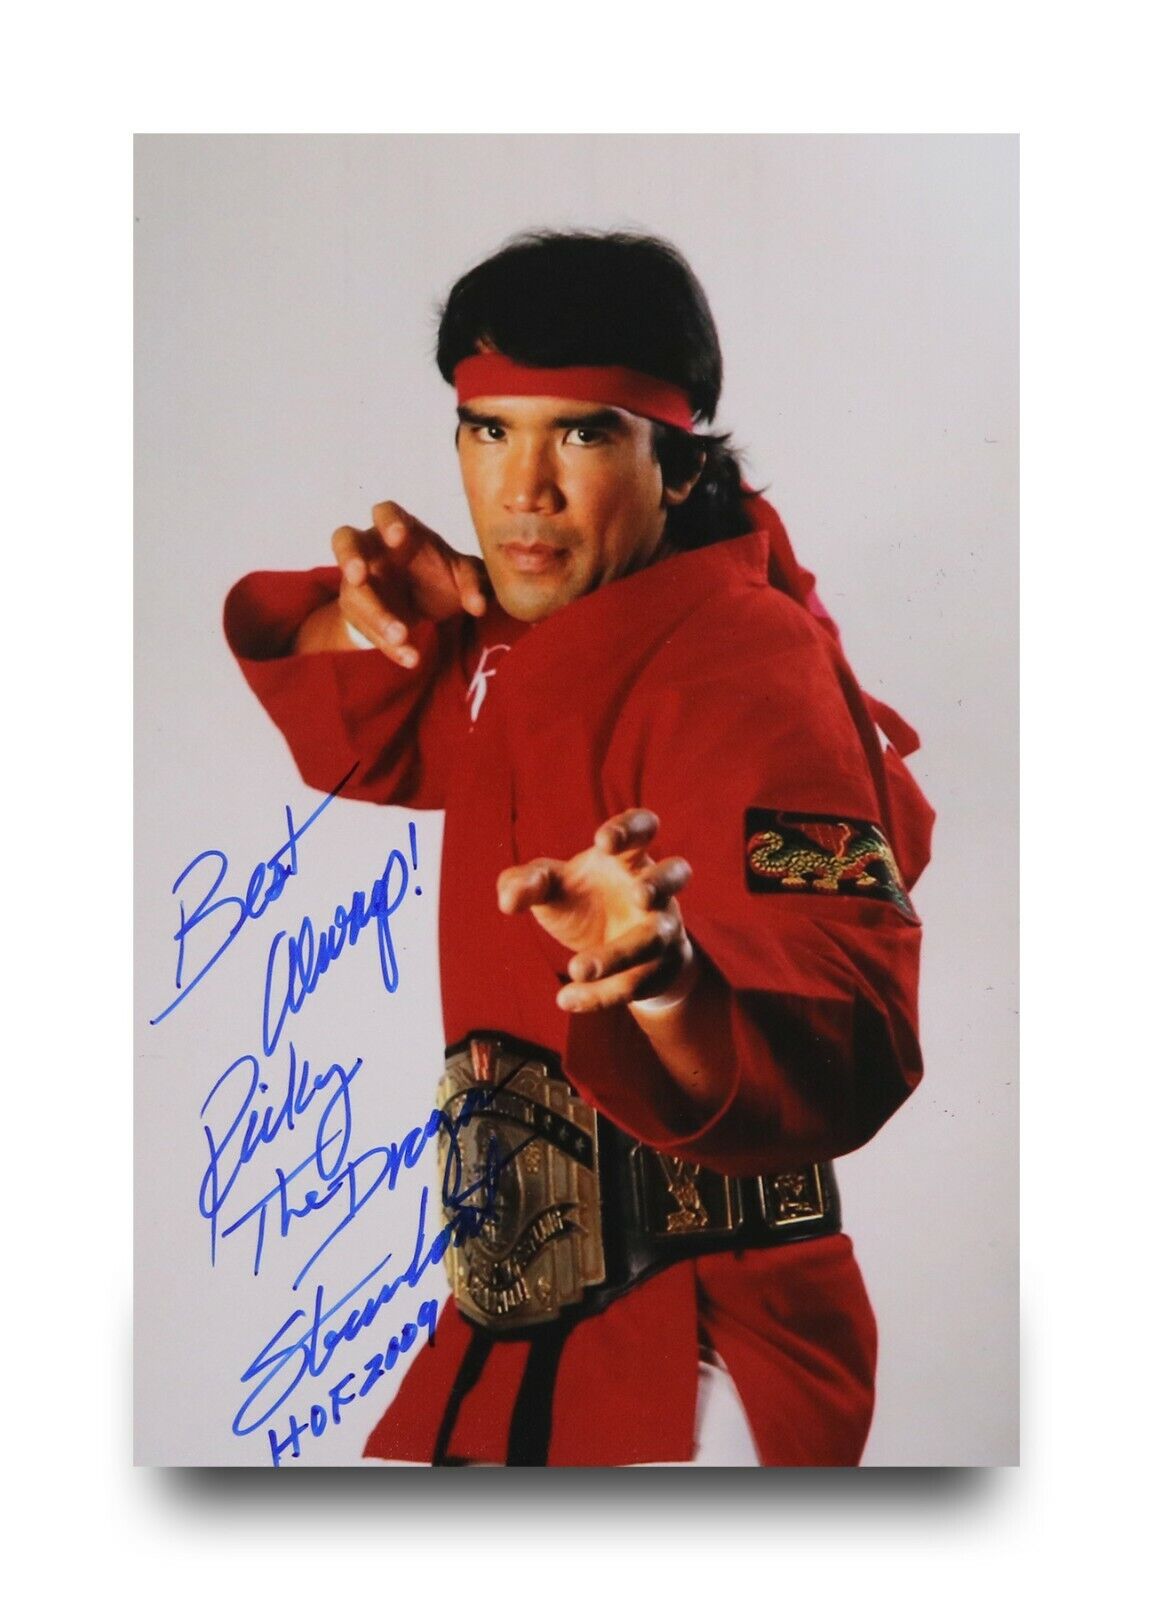 Ricky The Dragon Steamboat Signed 6x4 Photo Poster painting AWA WWF WCW Wrestler Autograph + COA